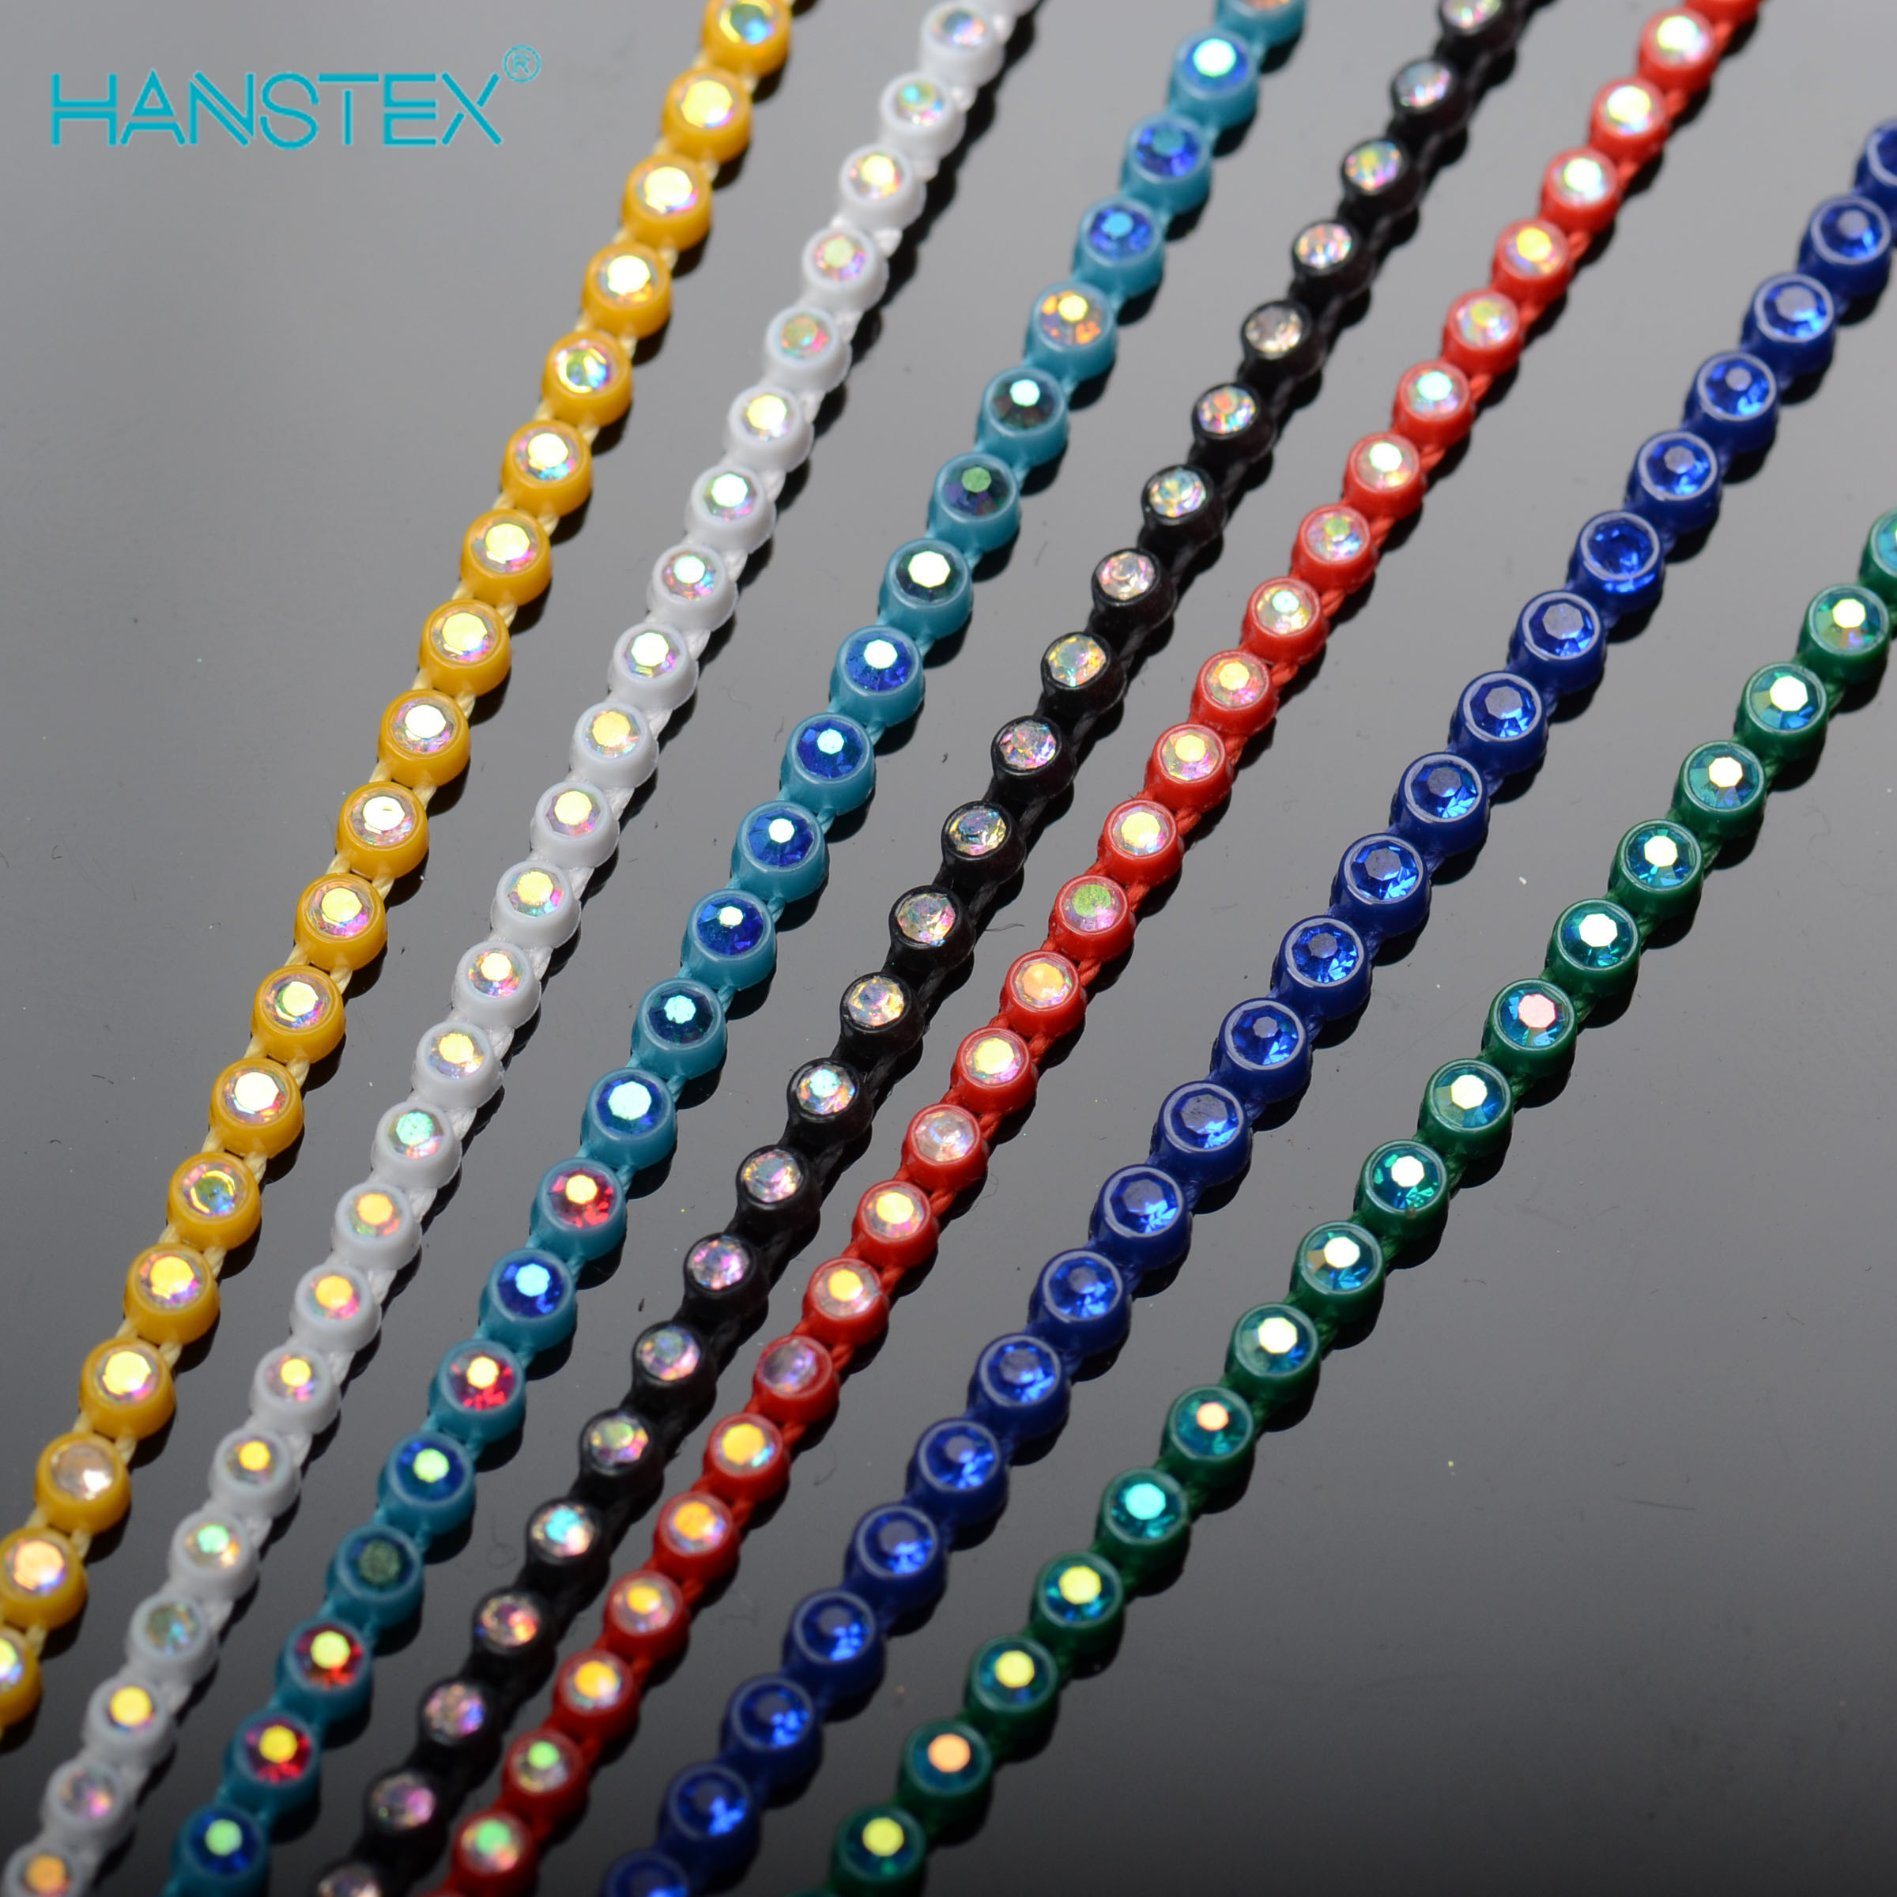 Factory Wholesale Ss6 Ss8 Multi Colors Rhinestone Cup Chain Plastic Trimming Rhinestone Banding